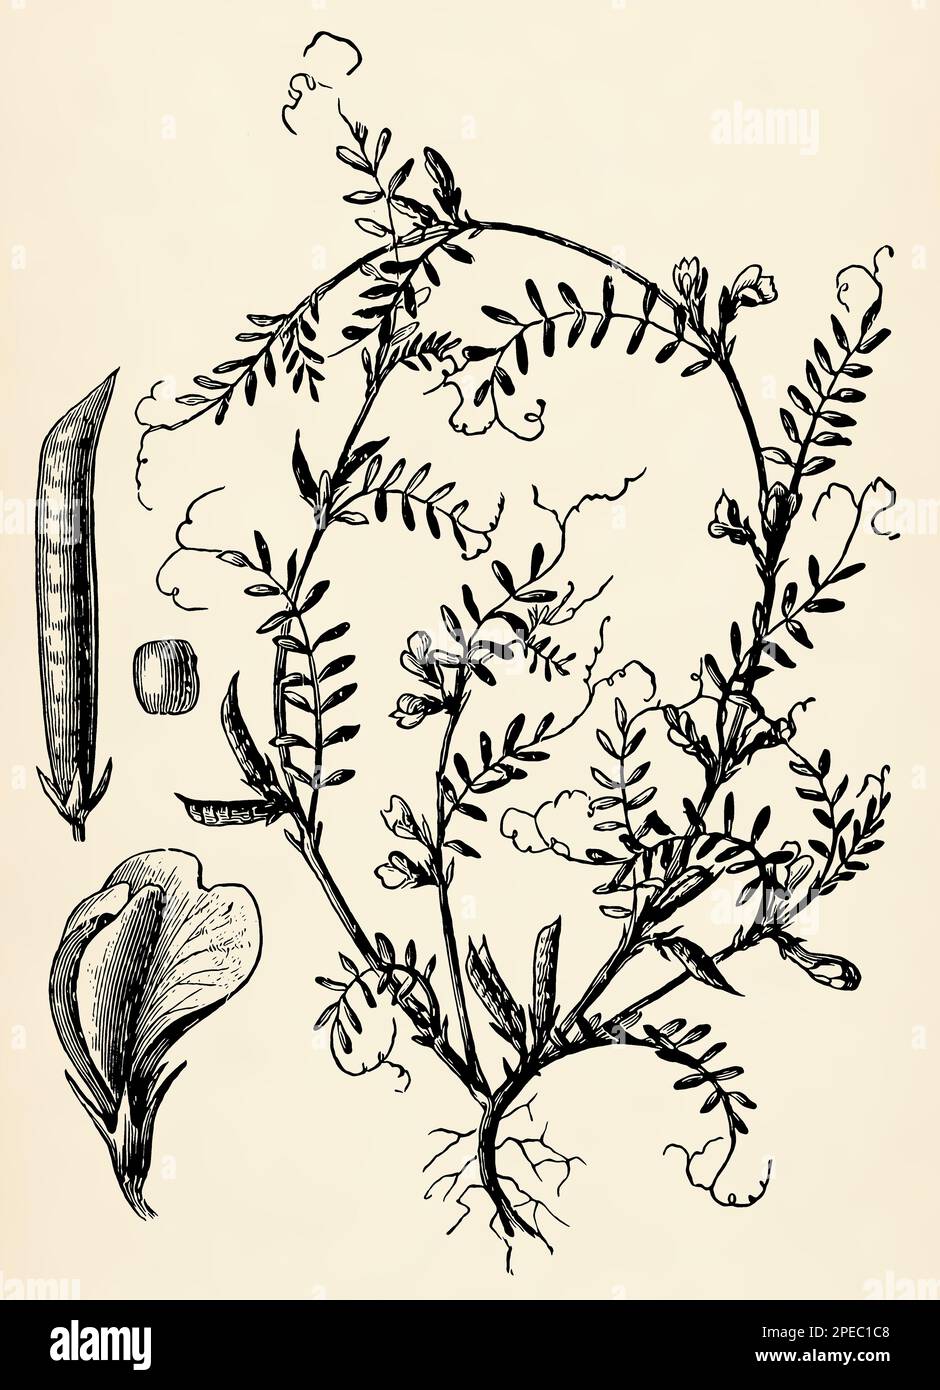 Root system, stem, flowers and fruits of Vicia sativa. Antique stylized illustration. Stock Photo